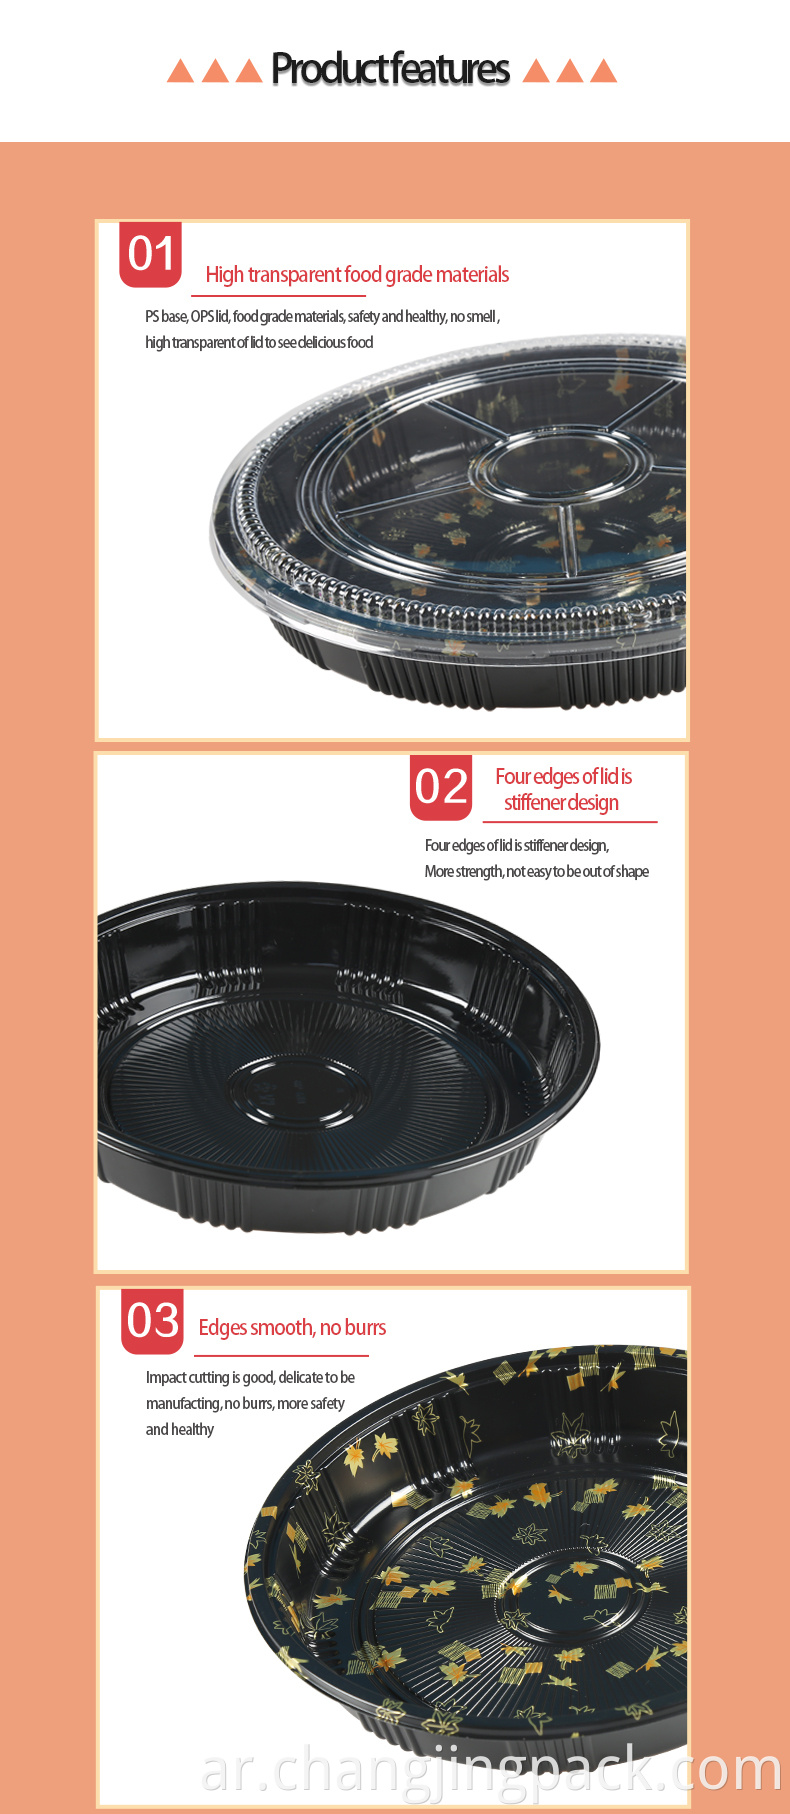 1. PS tray and OPS anti-fog lid. 2. 100% new material, food grade, safe. 3. SGS,FDA,EU. 4. For food,cookie,fruit,deli,salad,catering, sushi... 5. High quality and good after sales service. 